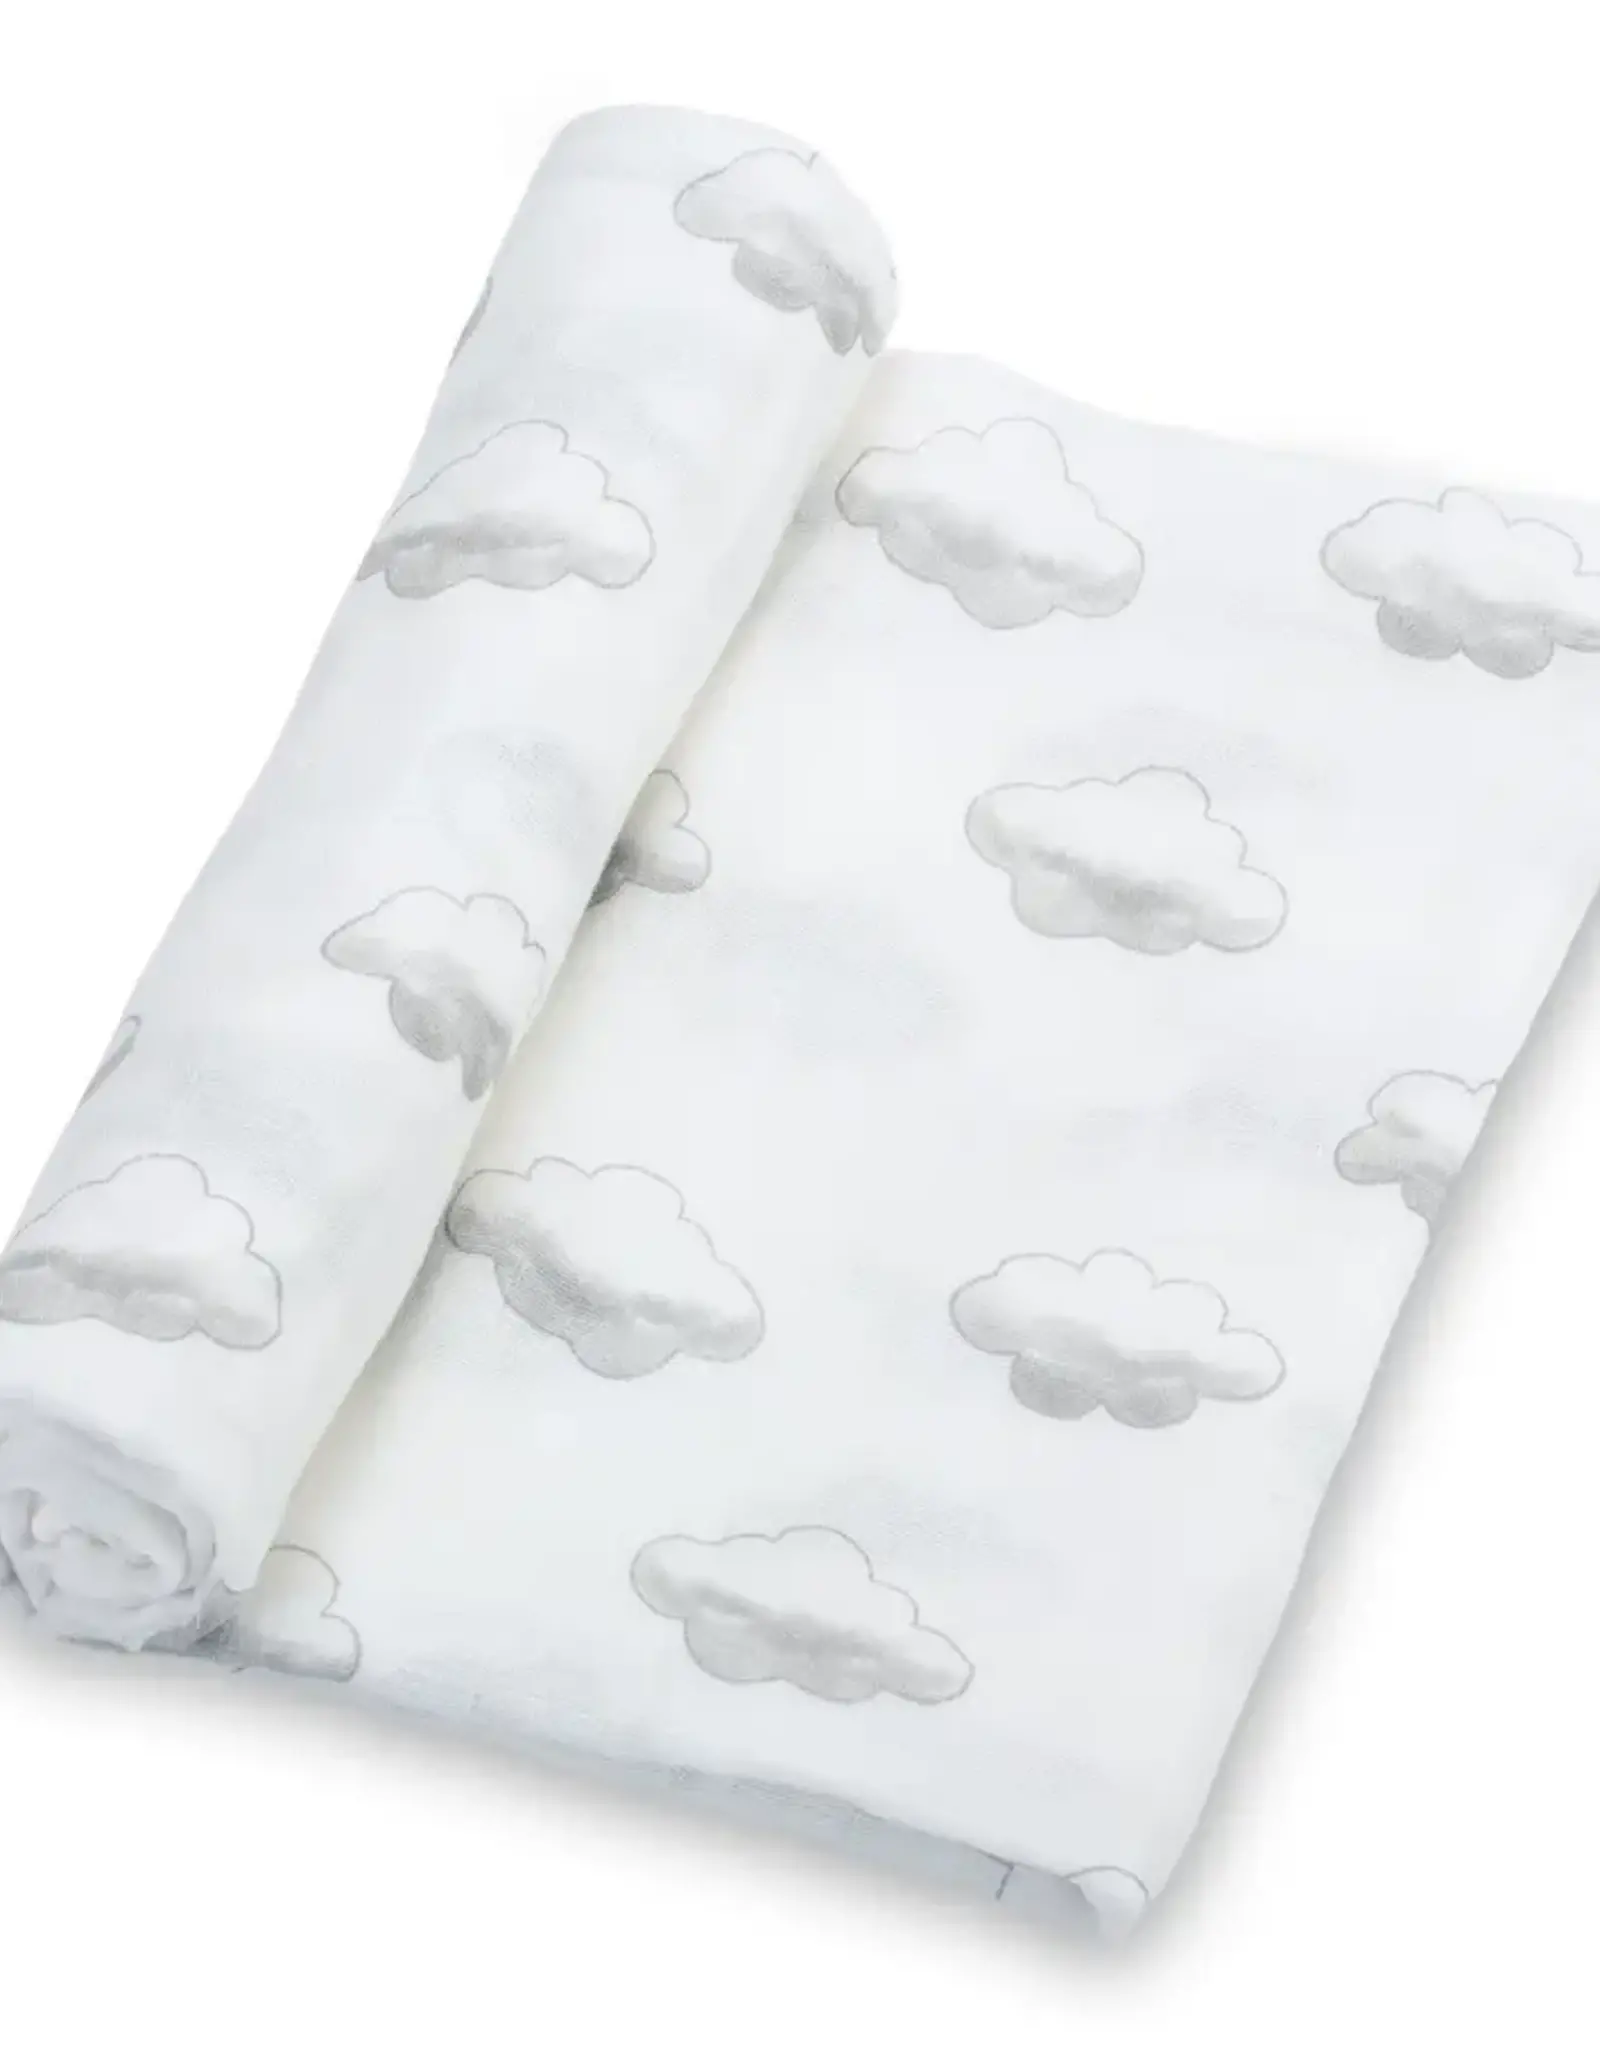 When Skies Are Grey Baby Swaddle Blanket